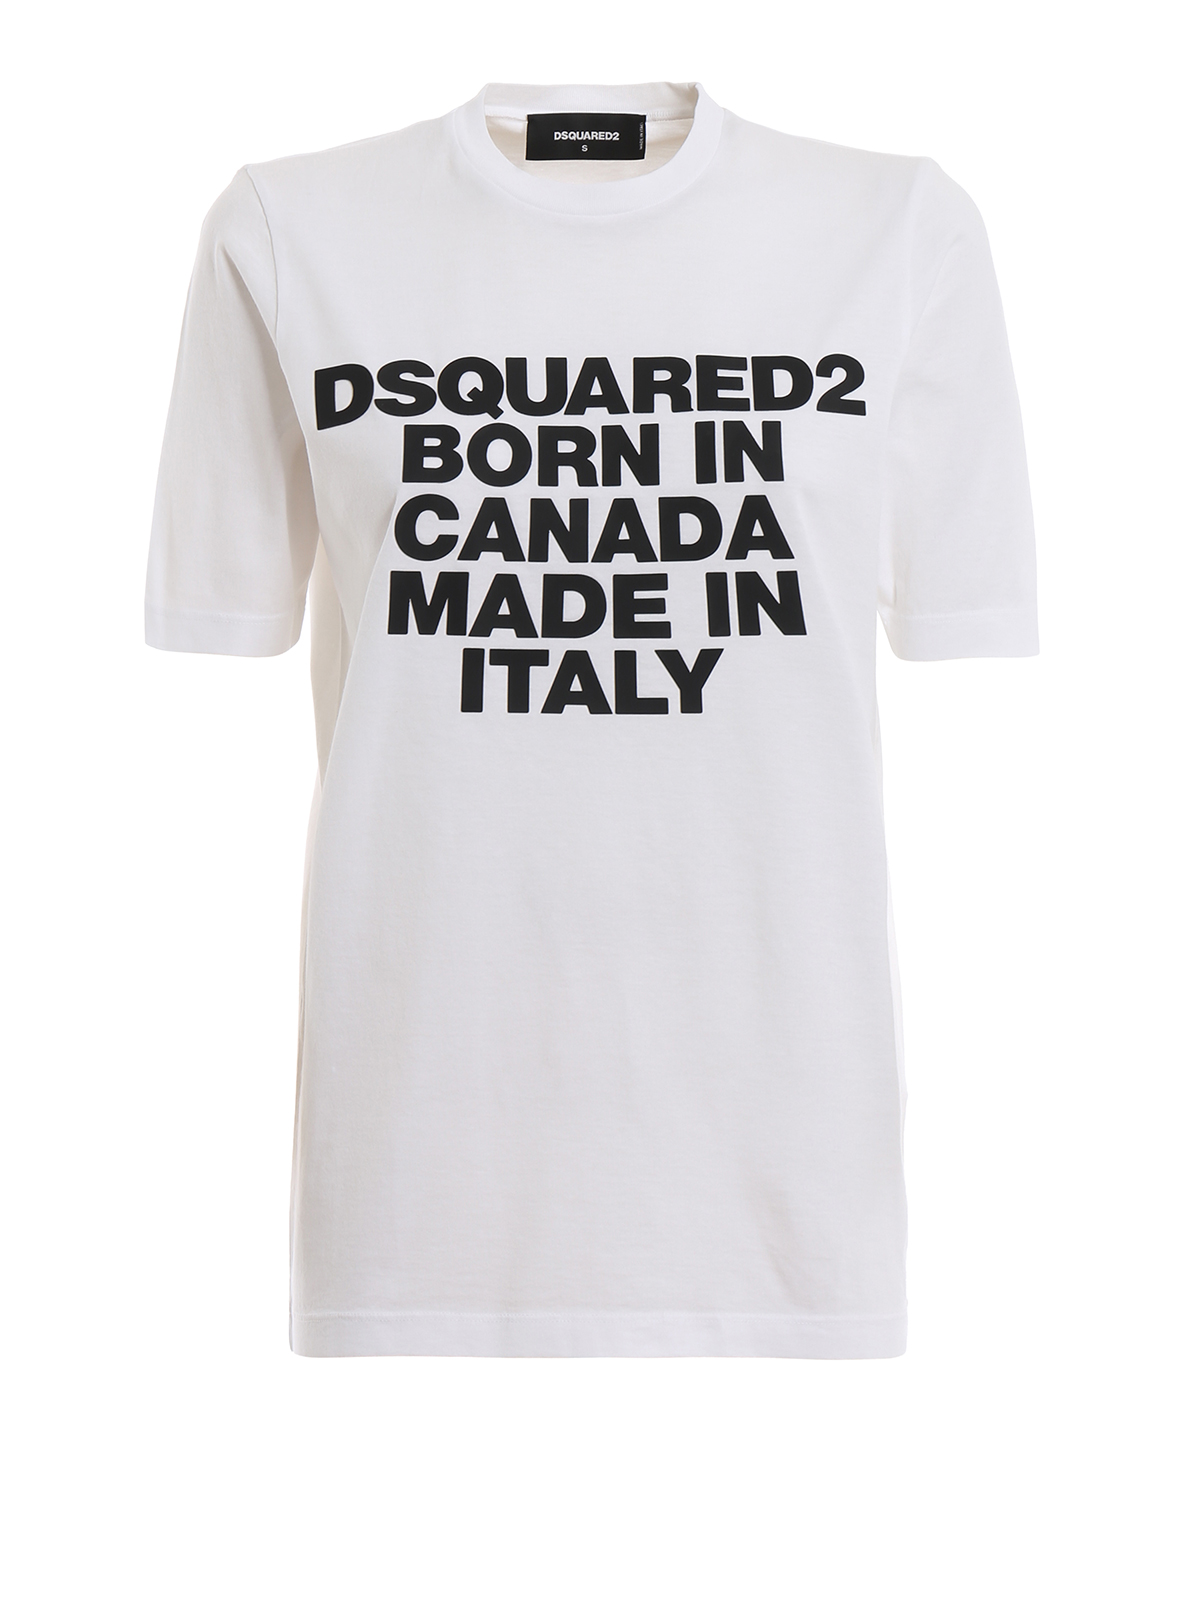 dsquared2 italy